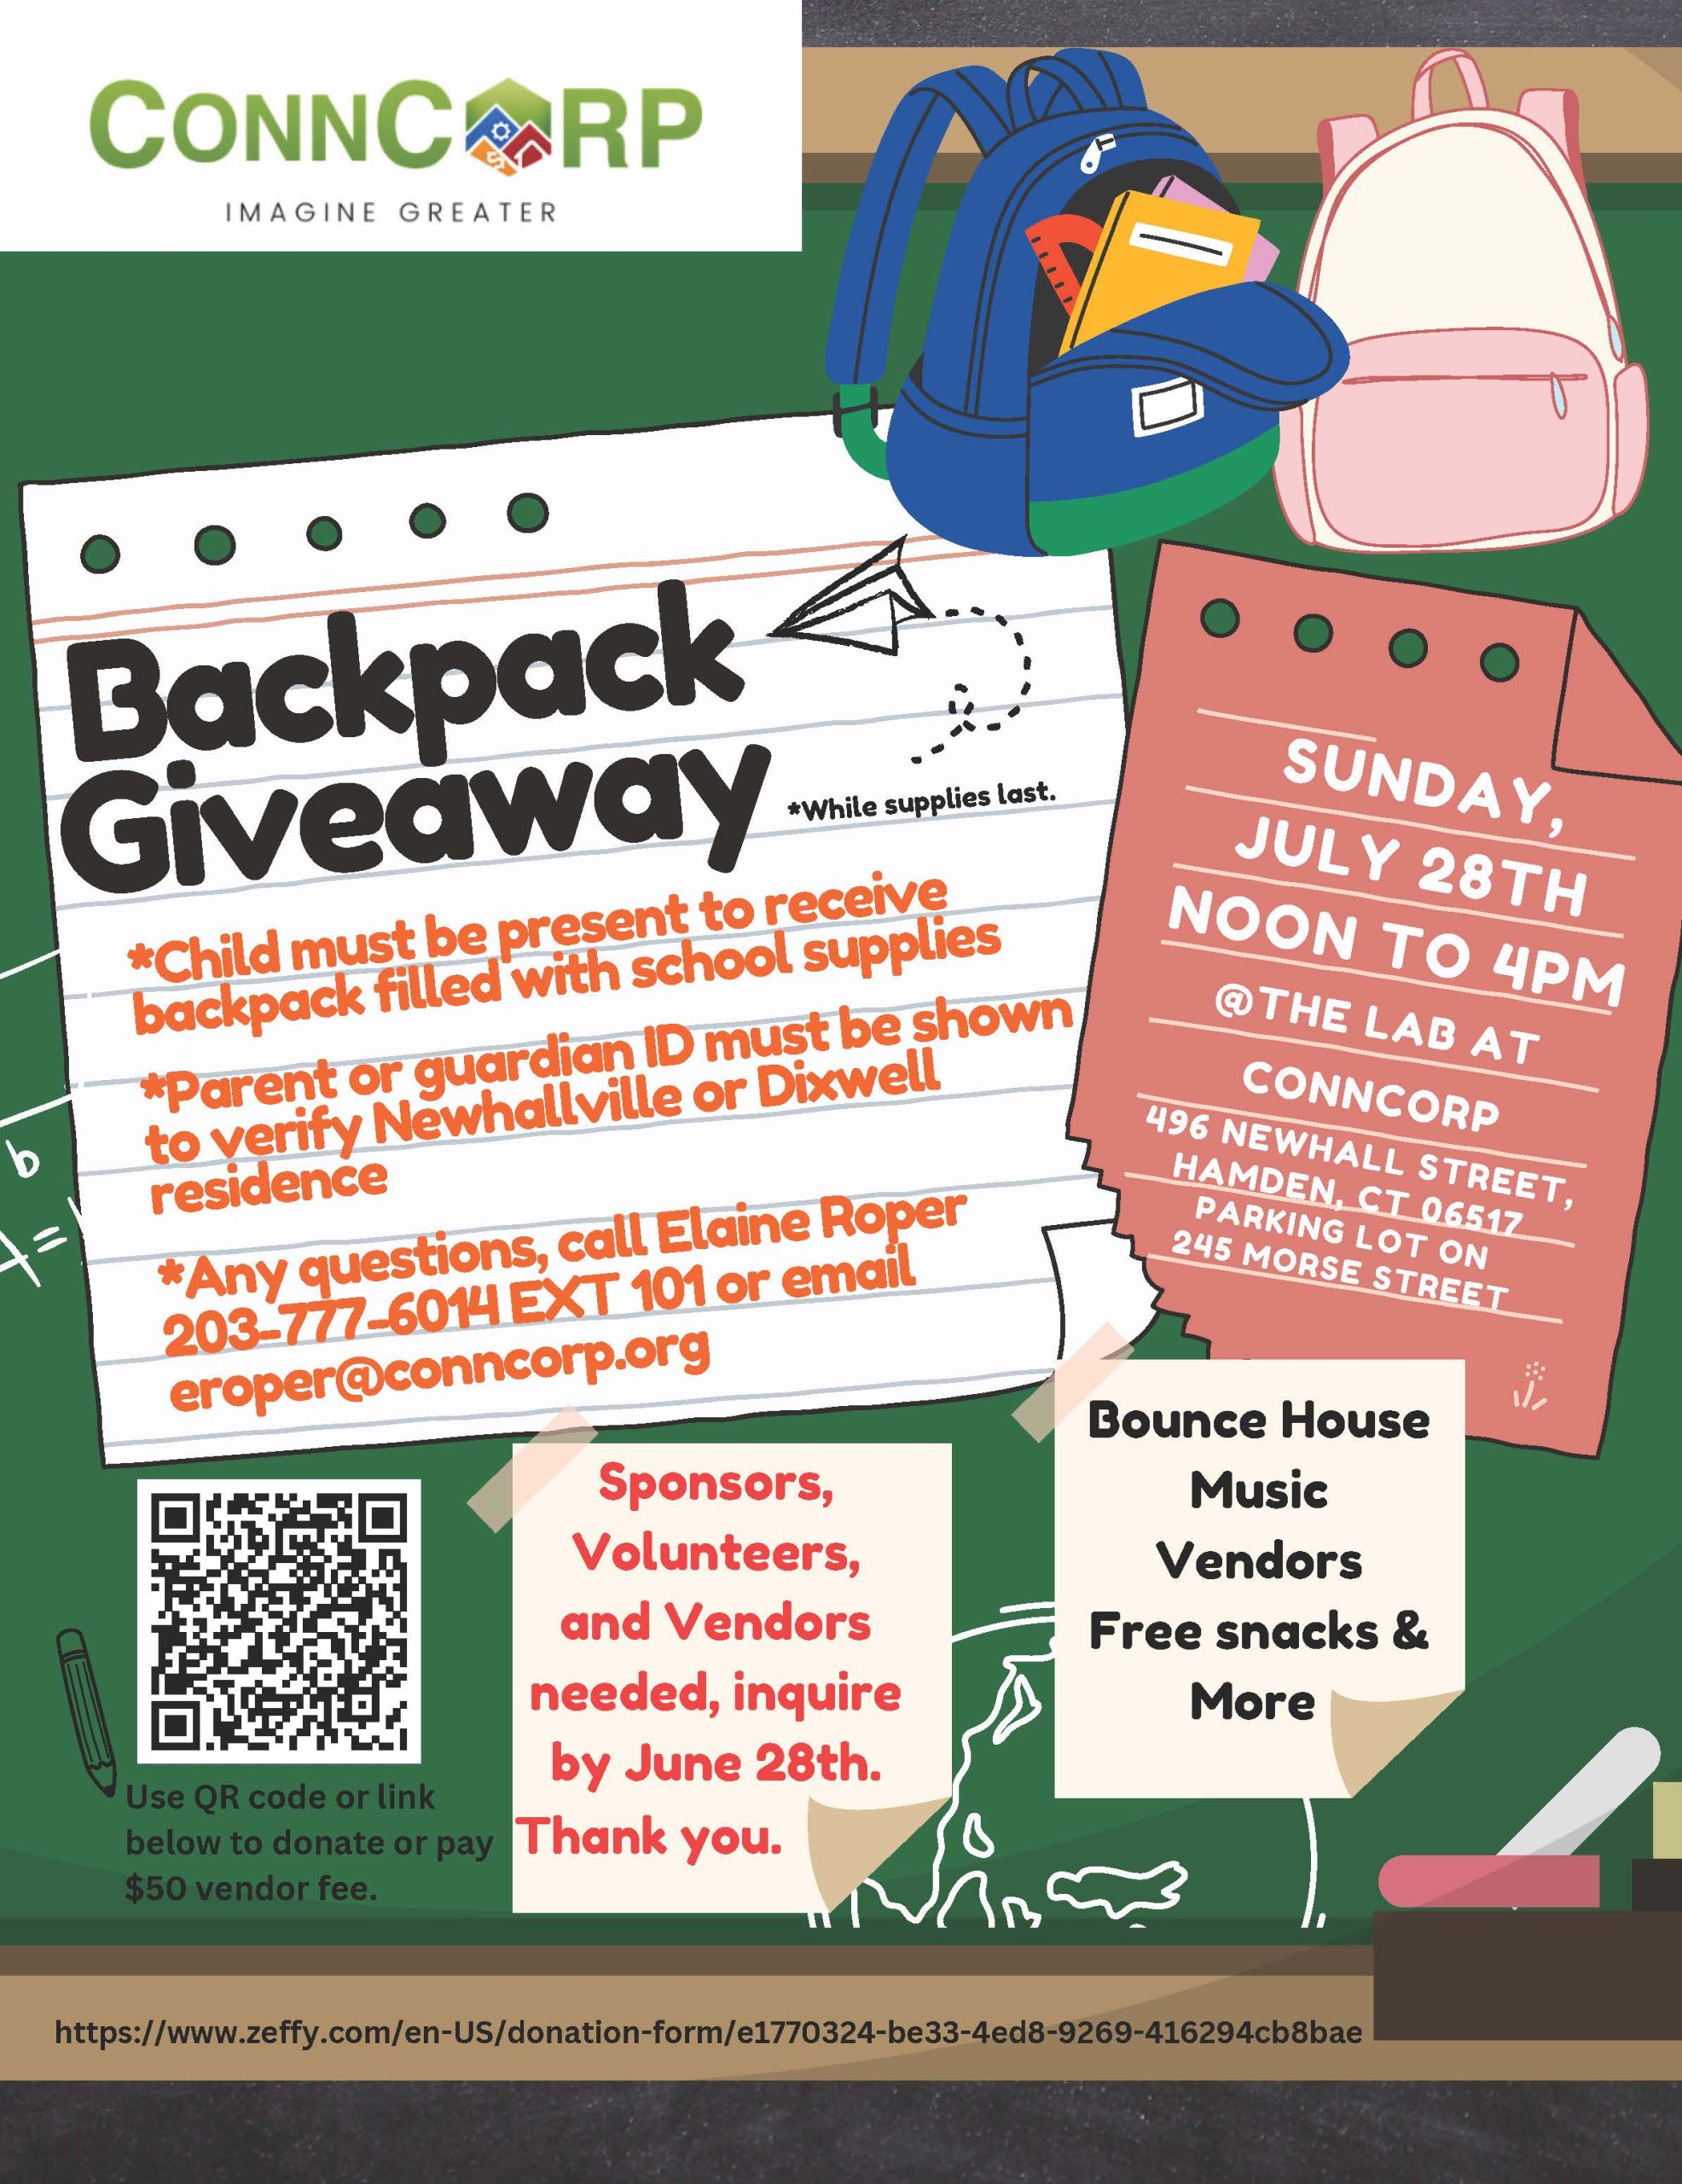 CONNCORP PRESENTS:  BACKPACK GIVEAWAY